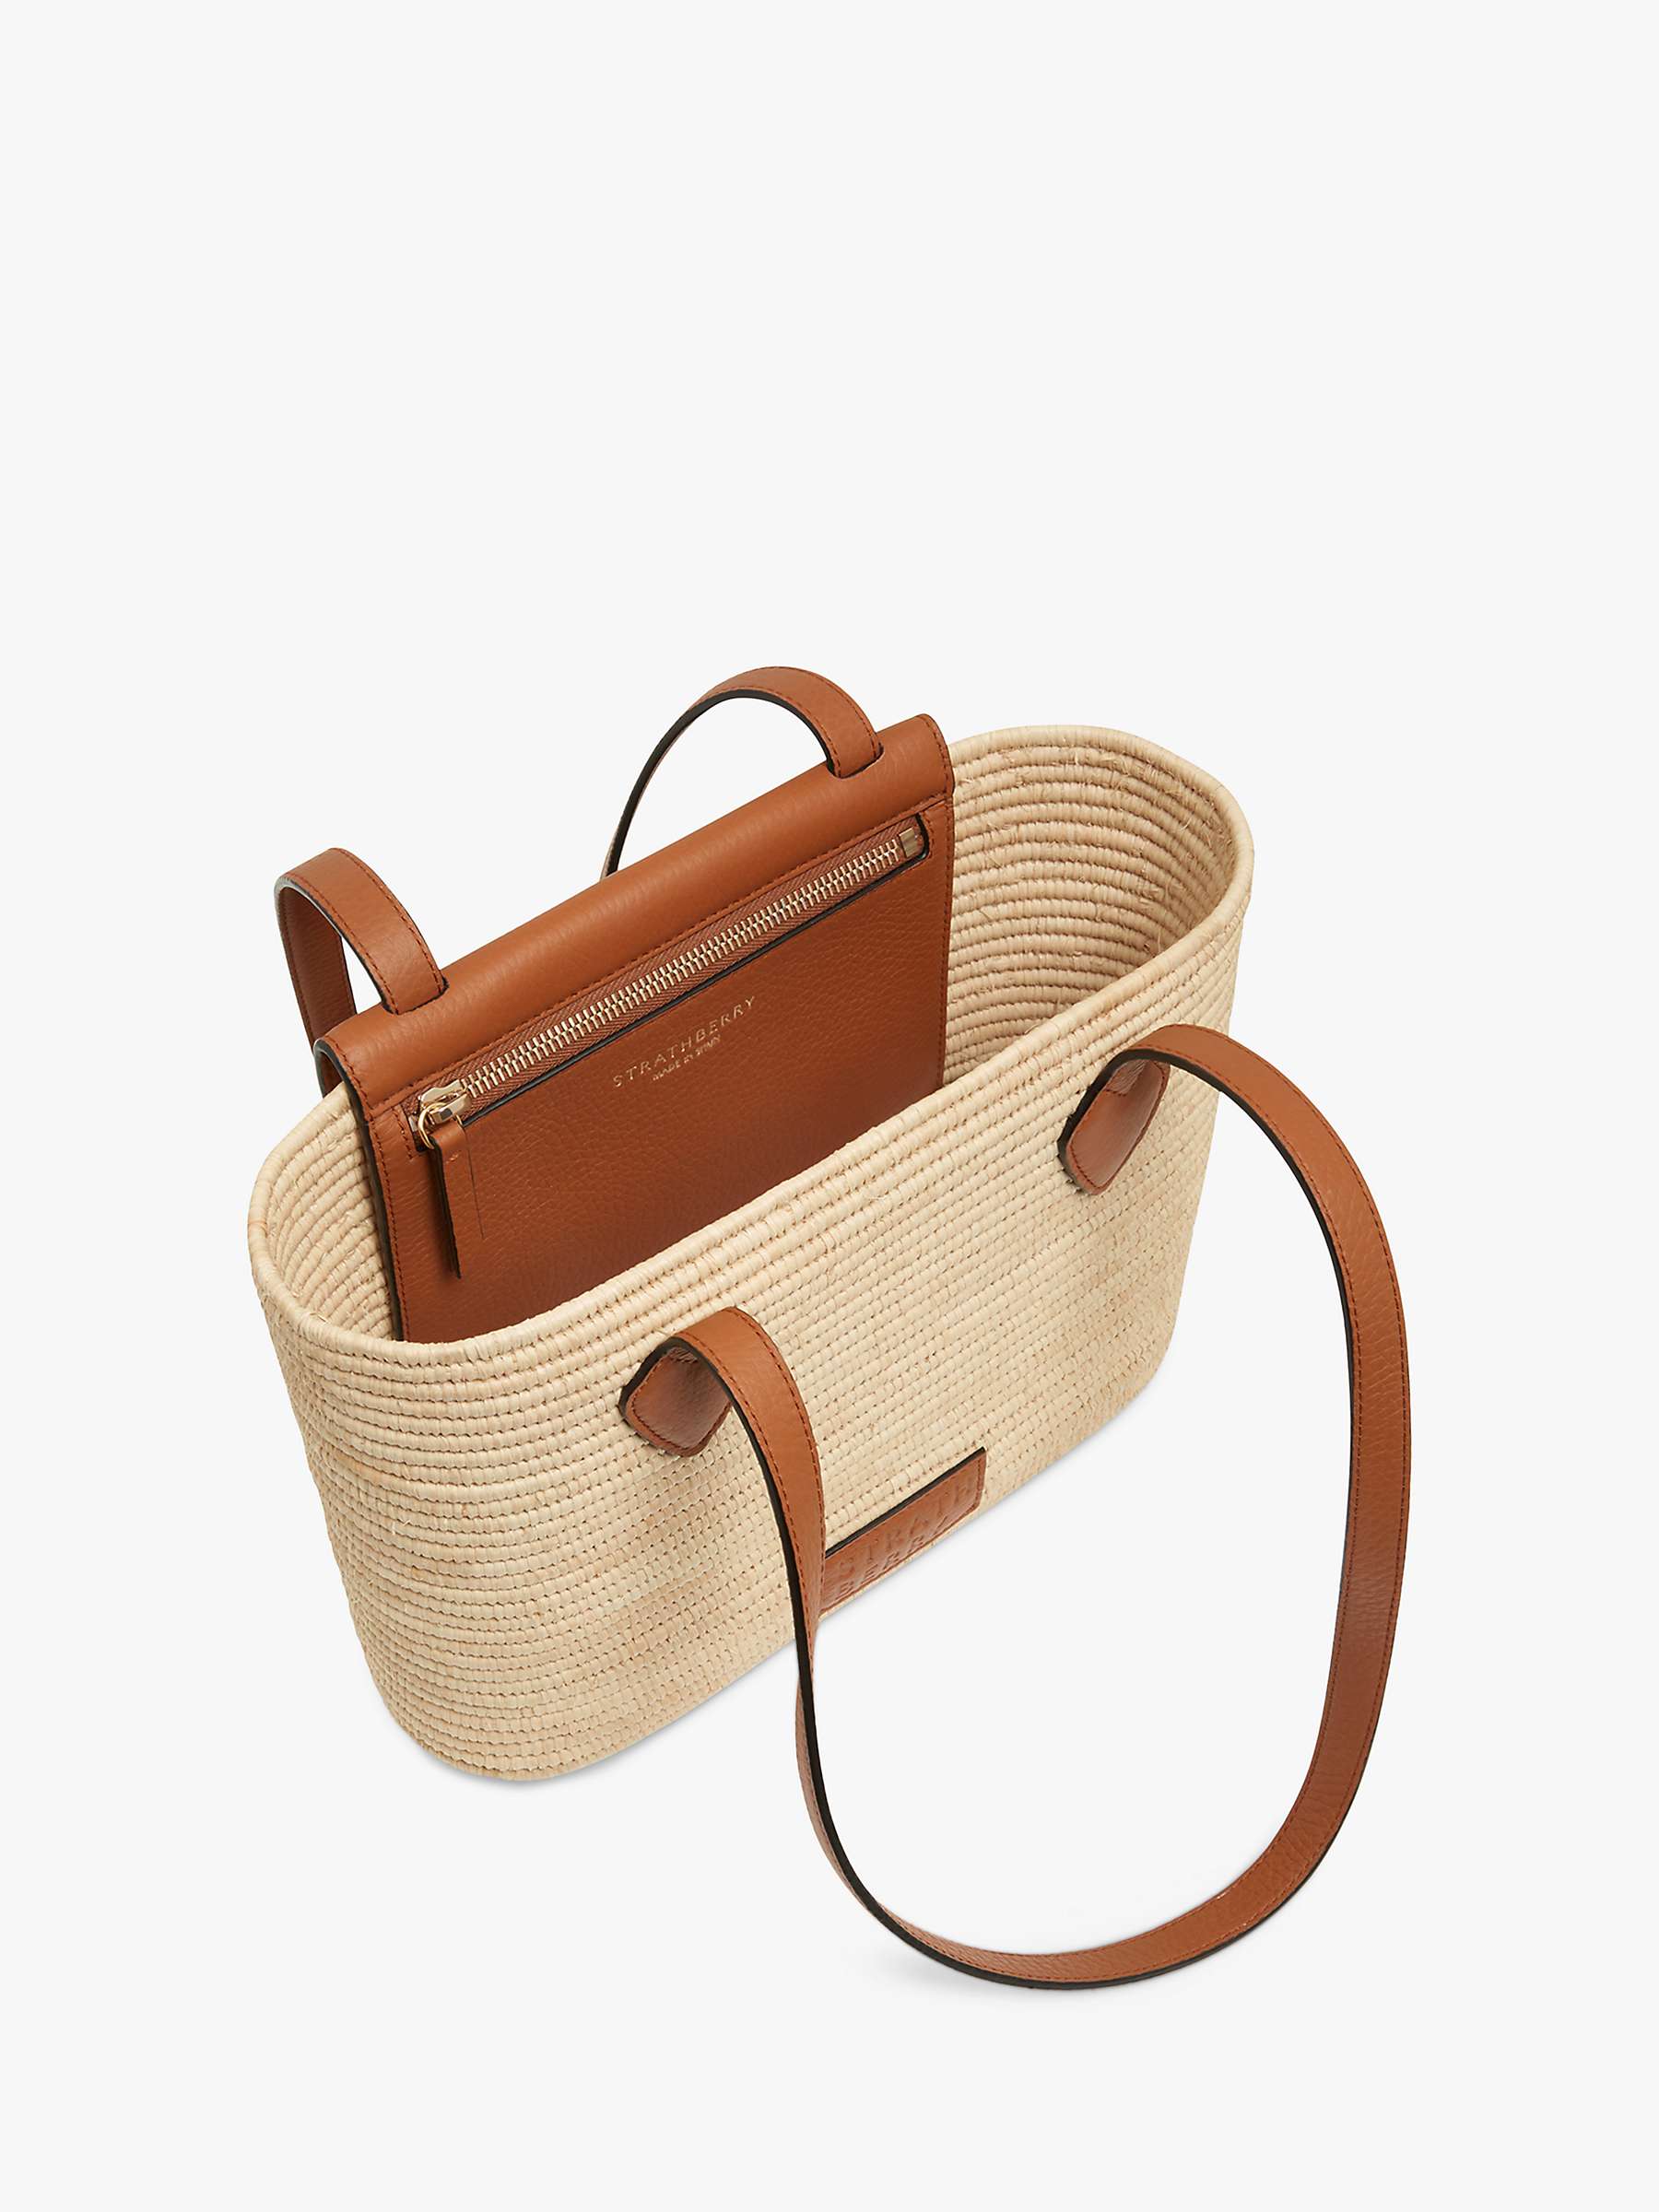 Buy Strathberry The Strathberry Basket Bag, Natural/Tan Online at johnlewis.com